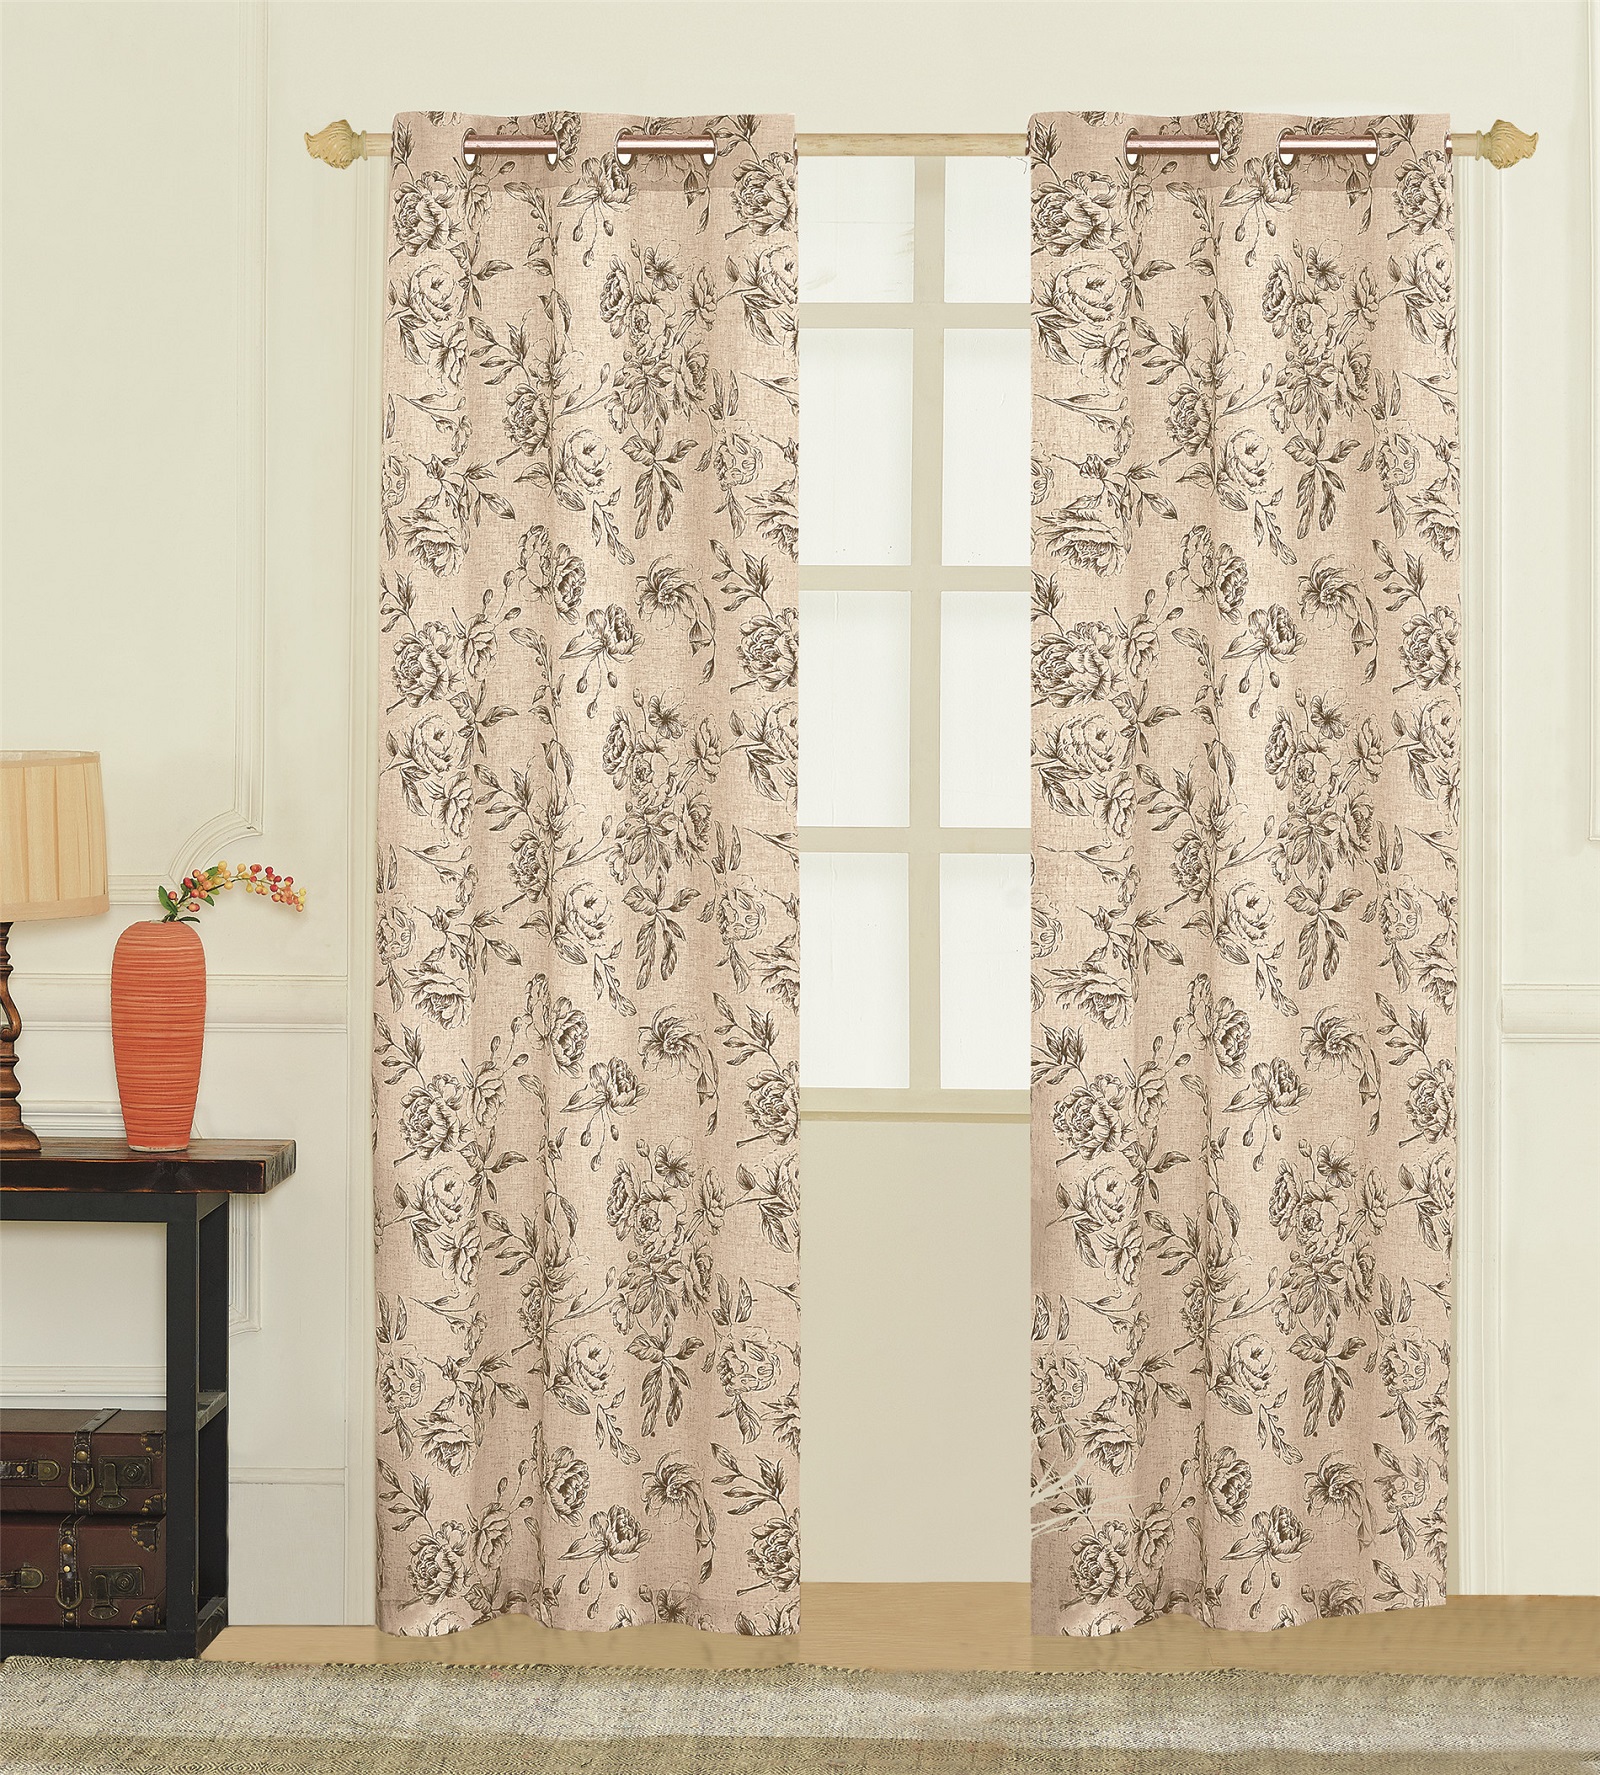 United Curtain Company Fiona is a Grommet Top 72" x 84" Poly-Linen Blend Print available in Black, Blue & Beige